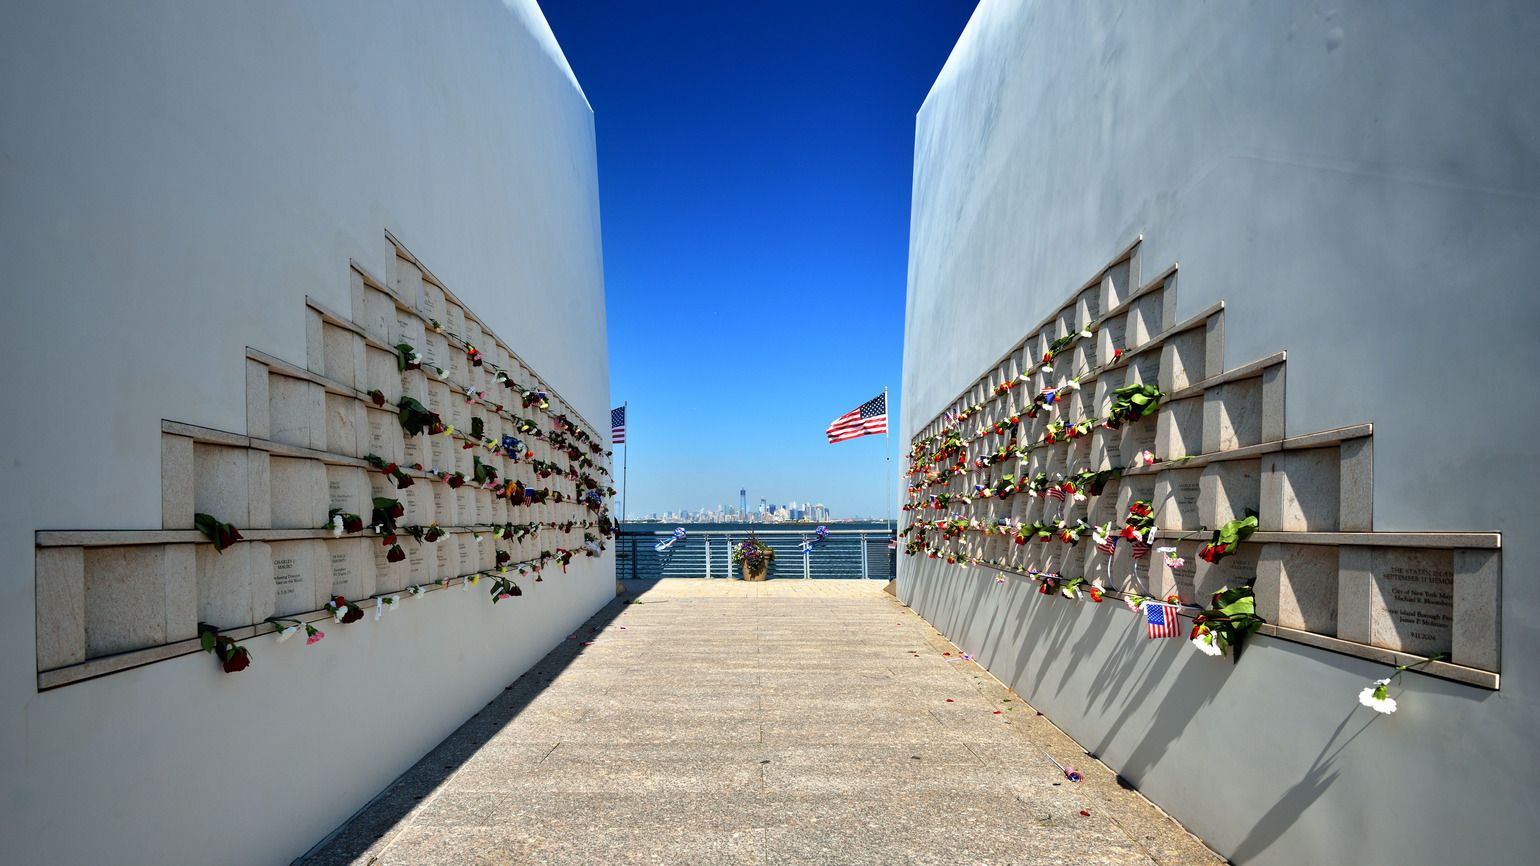 Post Cards 9-11 memorial on Staten Island in New York City (Alamy)